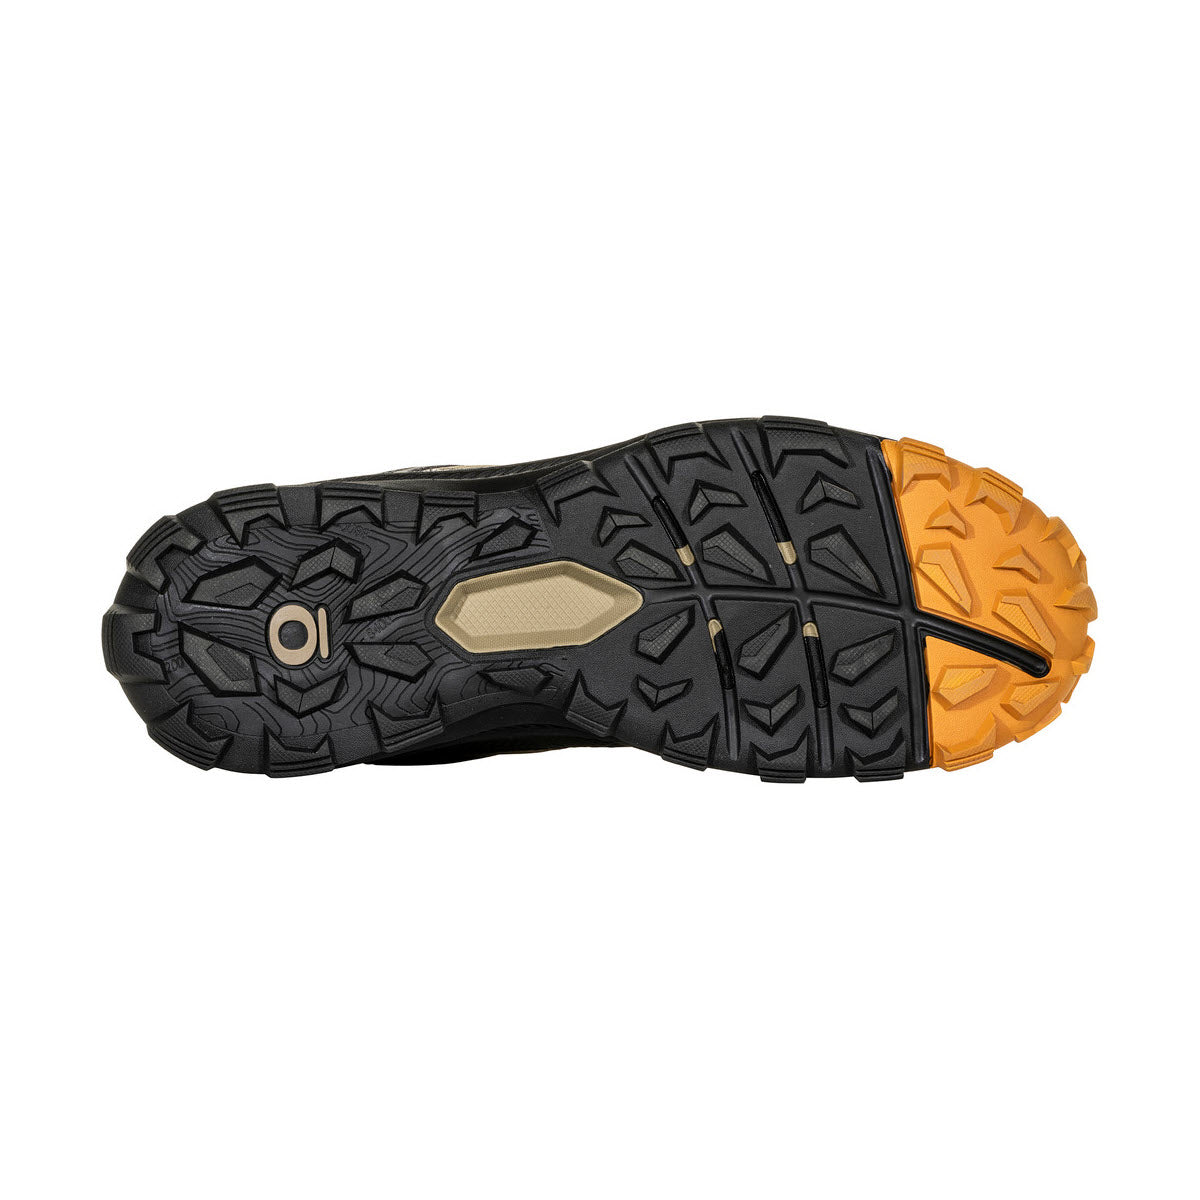 Sole of an Oboz Katabatic Low Thicket hiking boot with a black and grey tread pattern and orange accents.